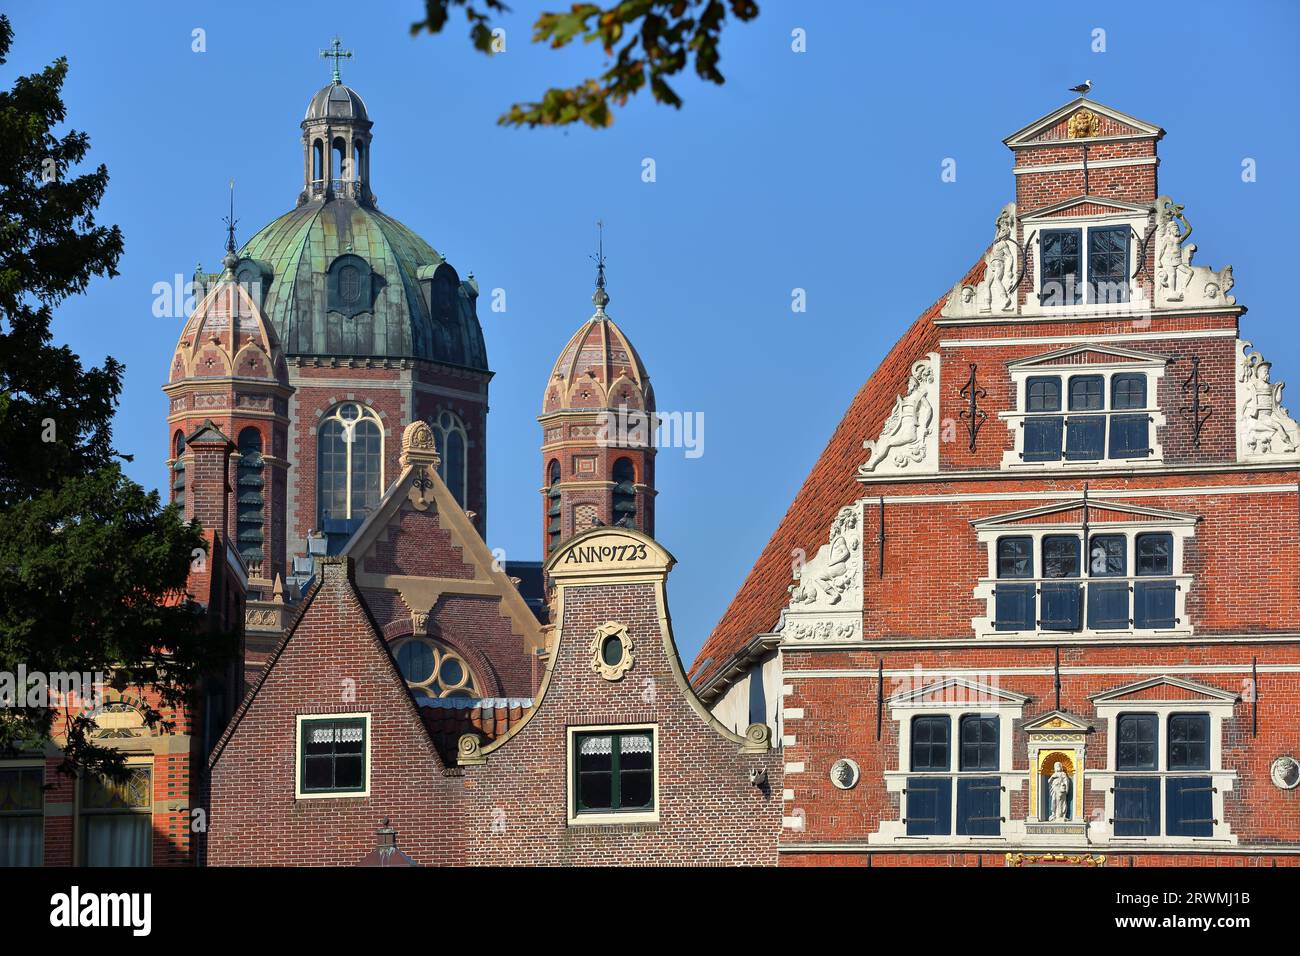 The colorful facades of historic houses located along Kerkstraat street in the city center of Hoorn, West Friesland, Netherlands Stock Photo